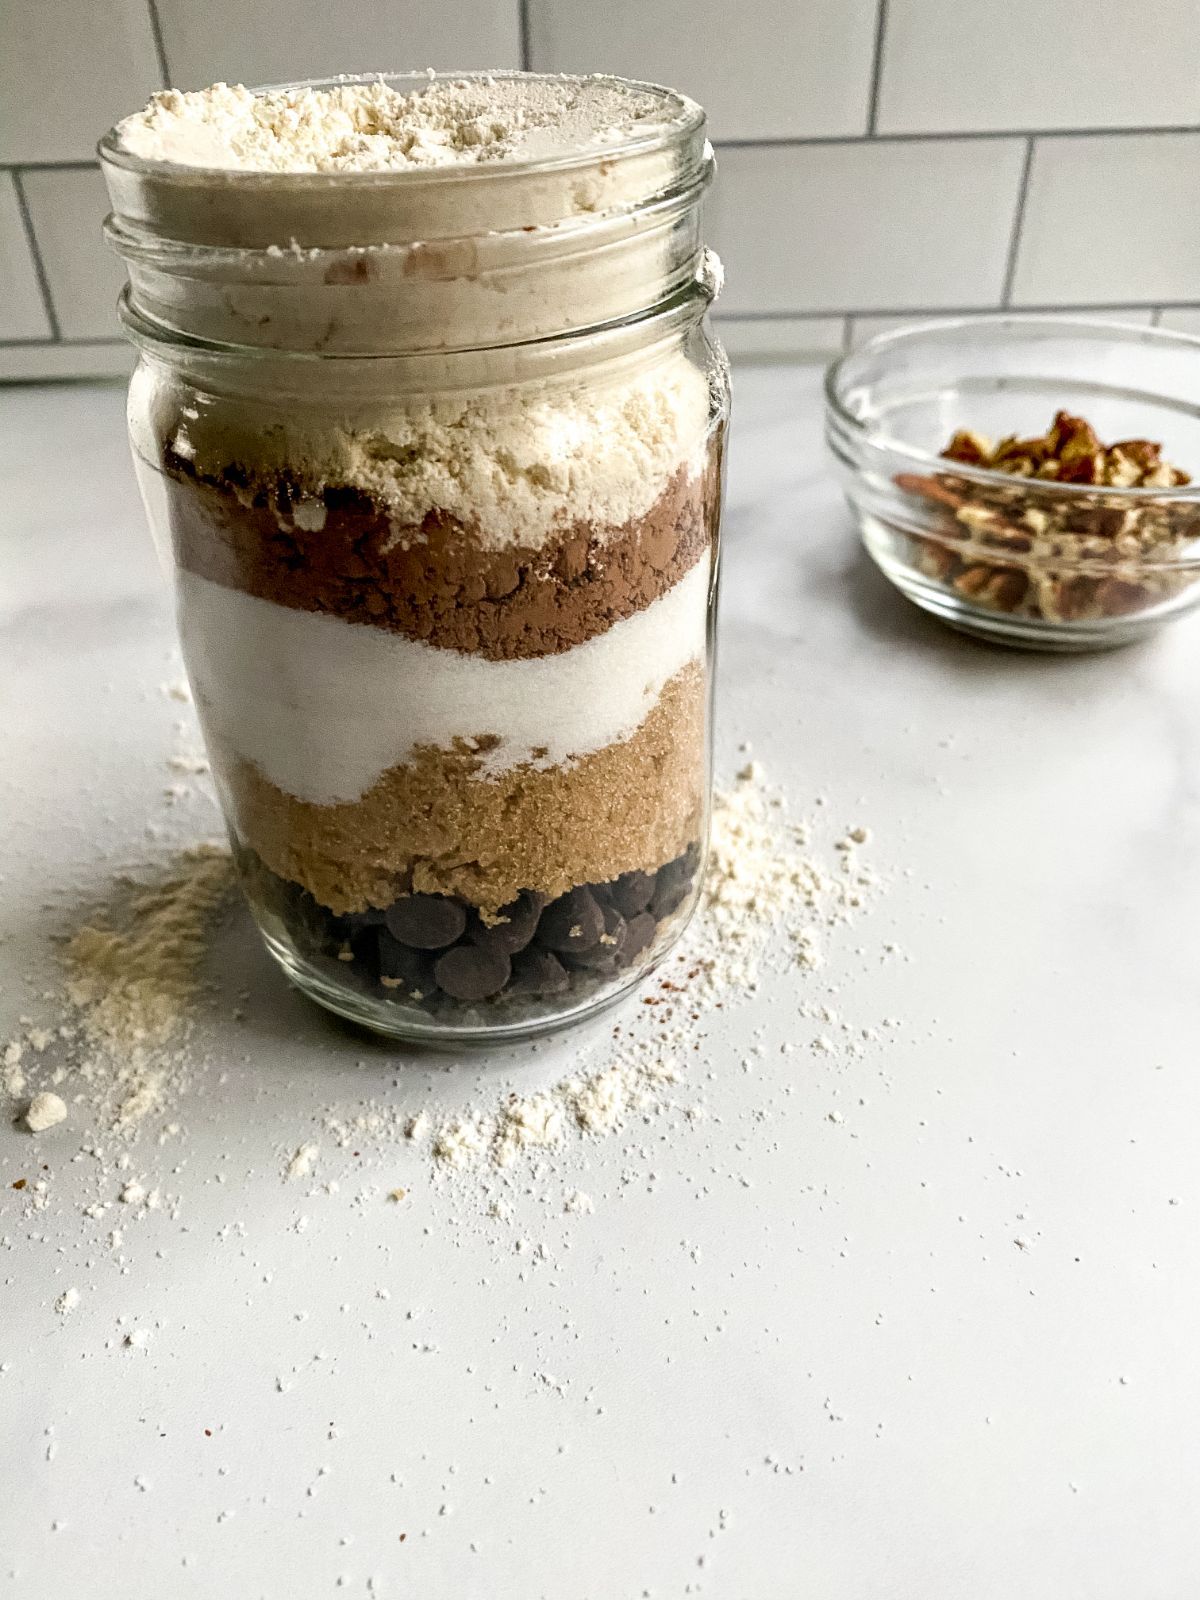 Brownie Mix in a jar freshly assembled next to nuts in a glass bowl.